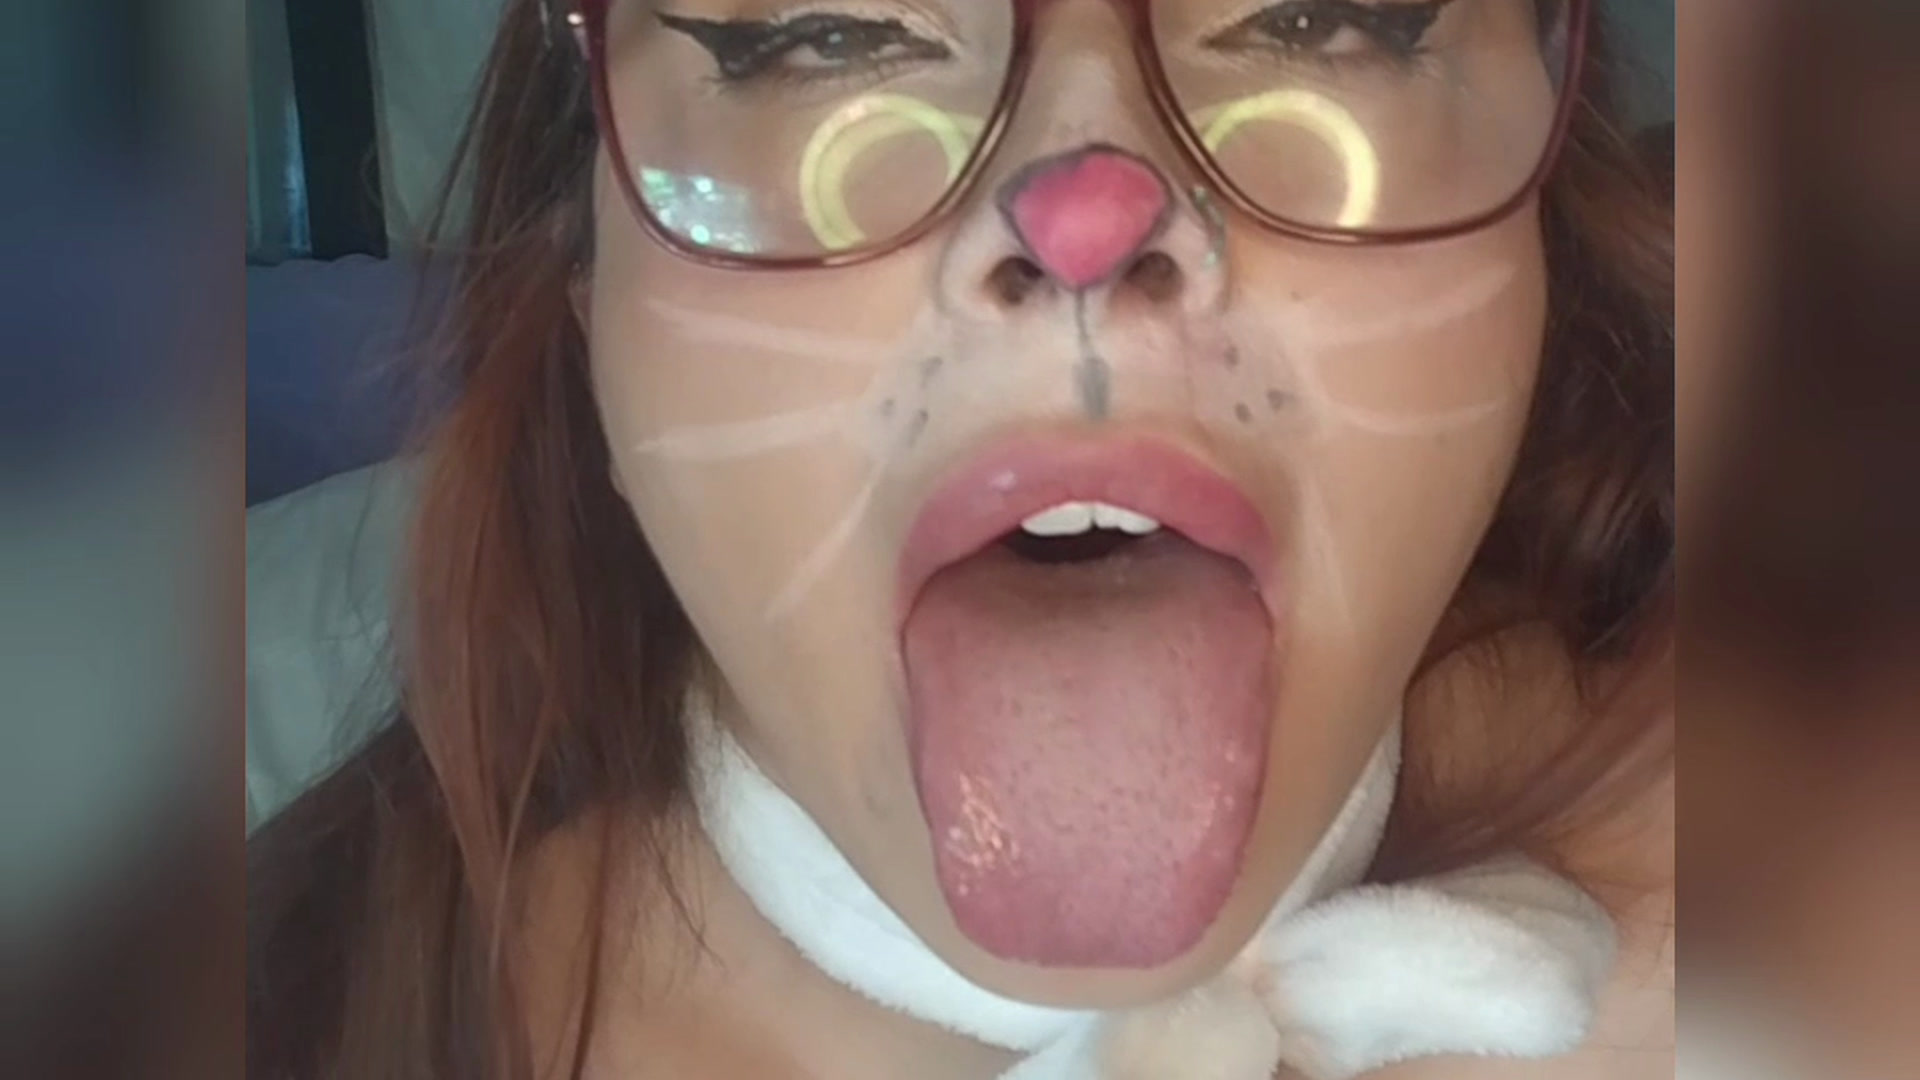 This is how the bunny looks after sucking your cock, full video on my profile